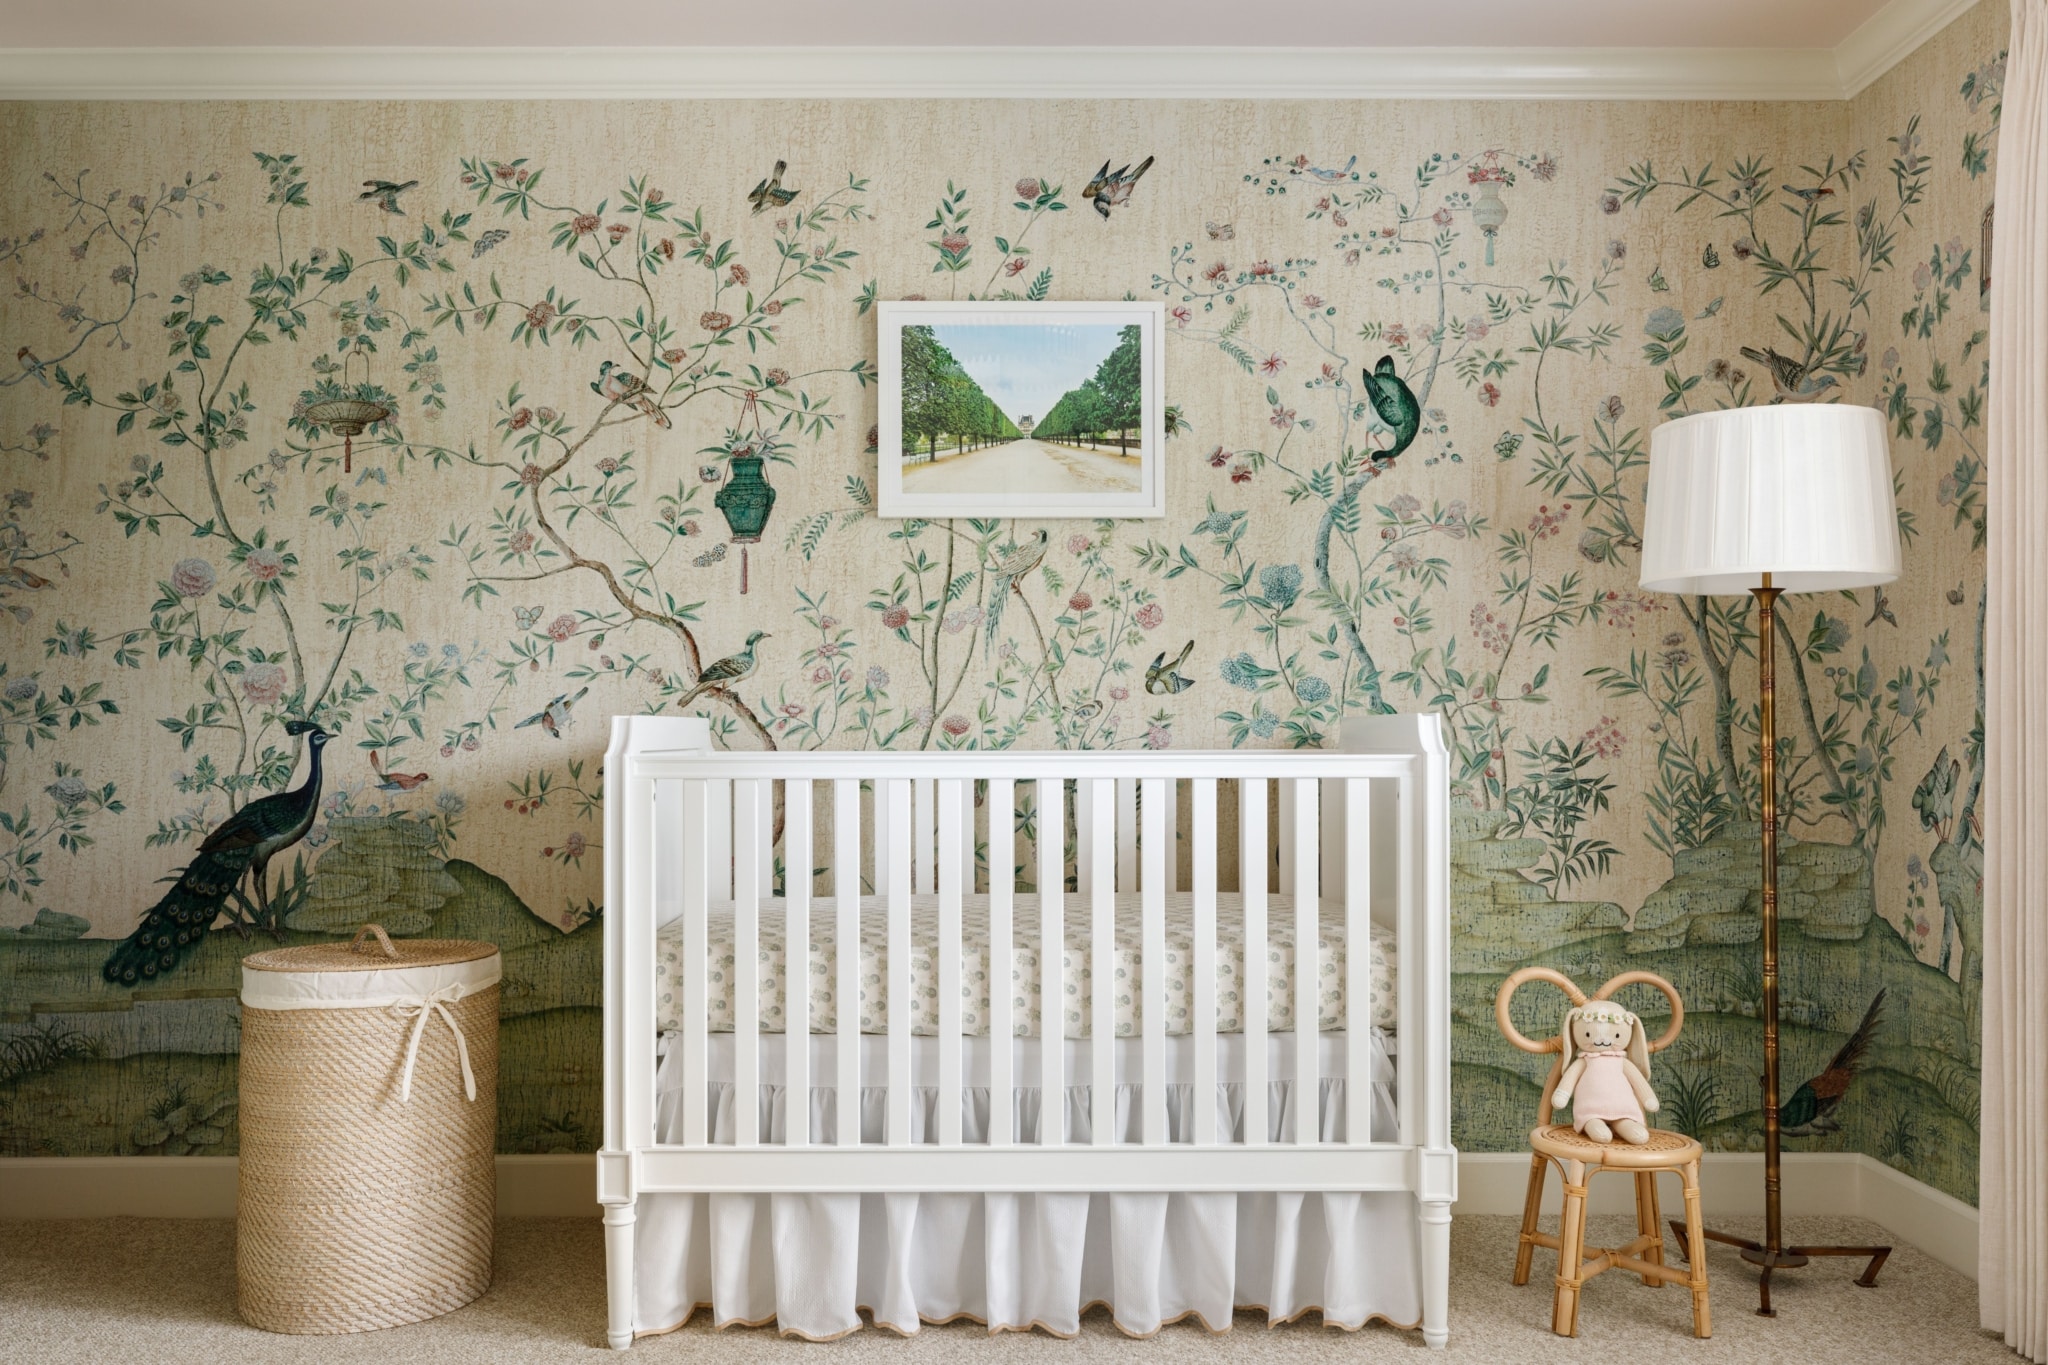 Paloma Contreras, celebrated interior designer and tastemaker, has once again captivated design enthusiasts with her latest book, The New Classic Home: Where Timeless Style Meets Modern Design. Aimée Mazzenga Photography - white crib with white bedding, deGournay wallpaper